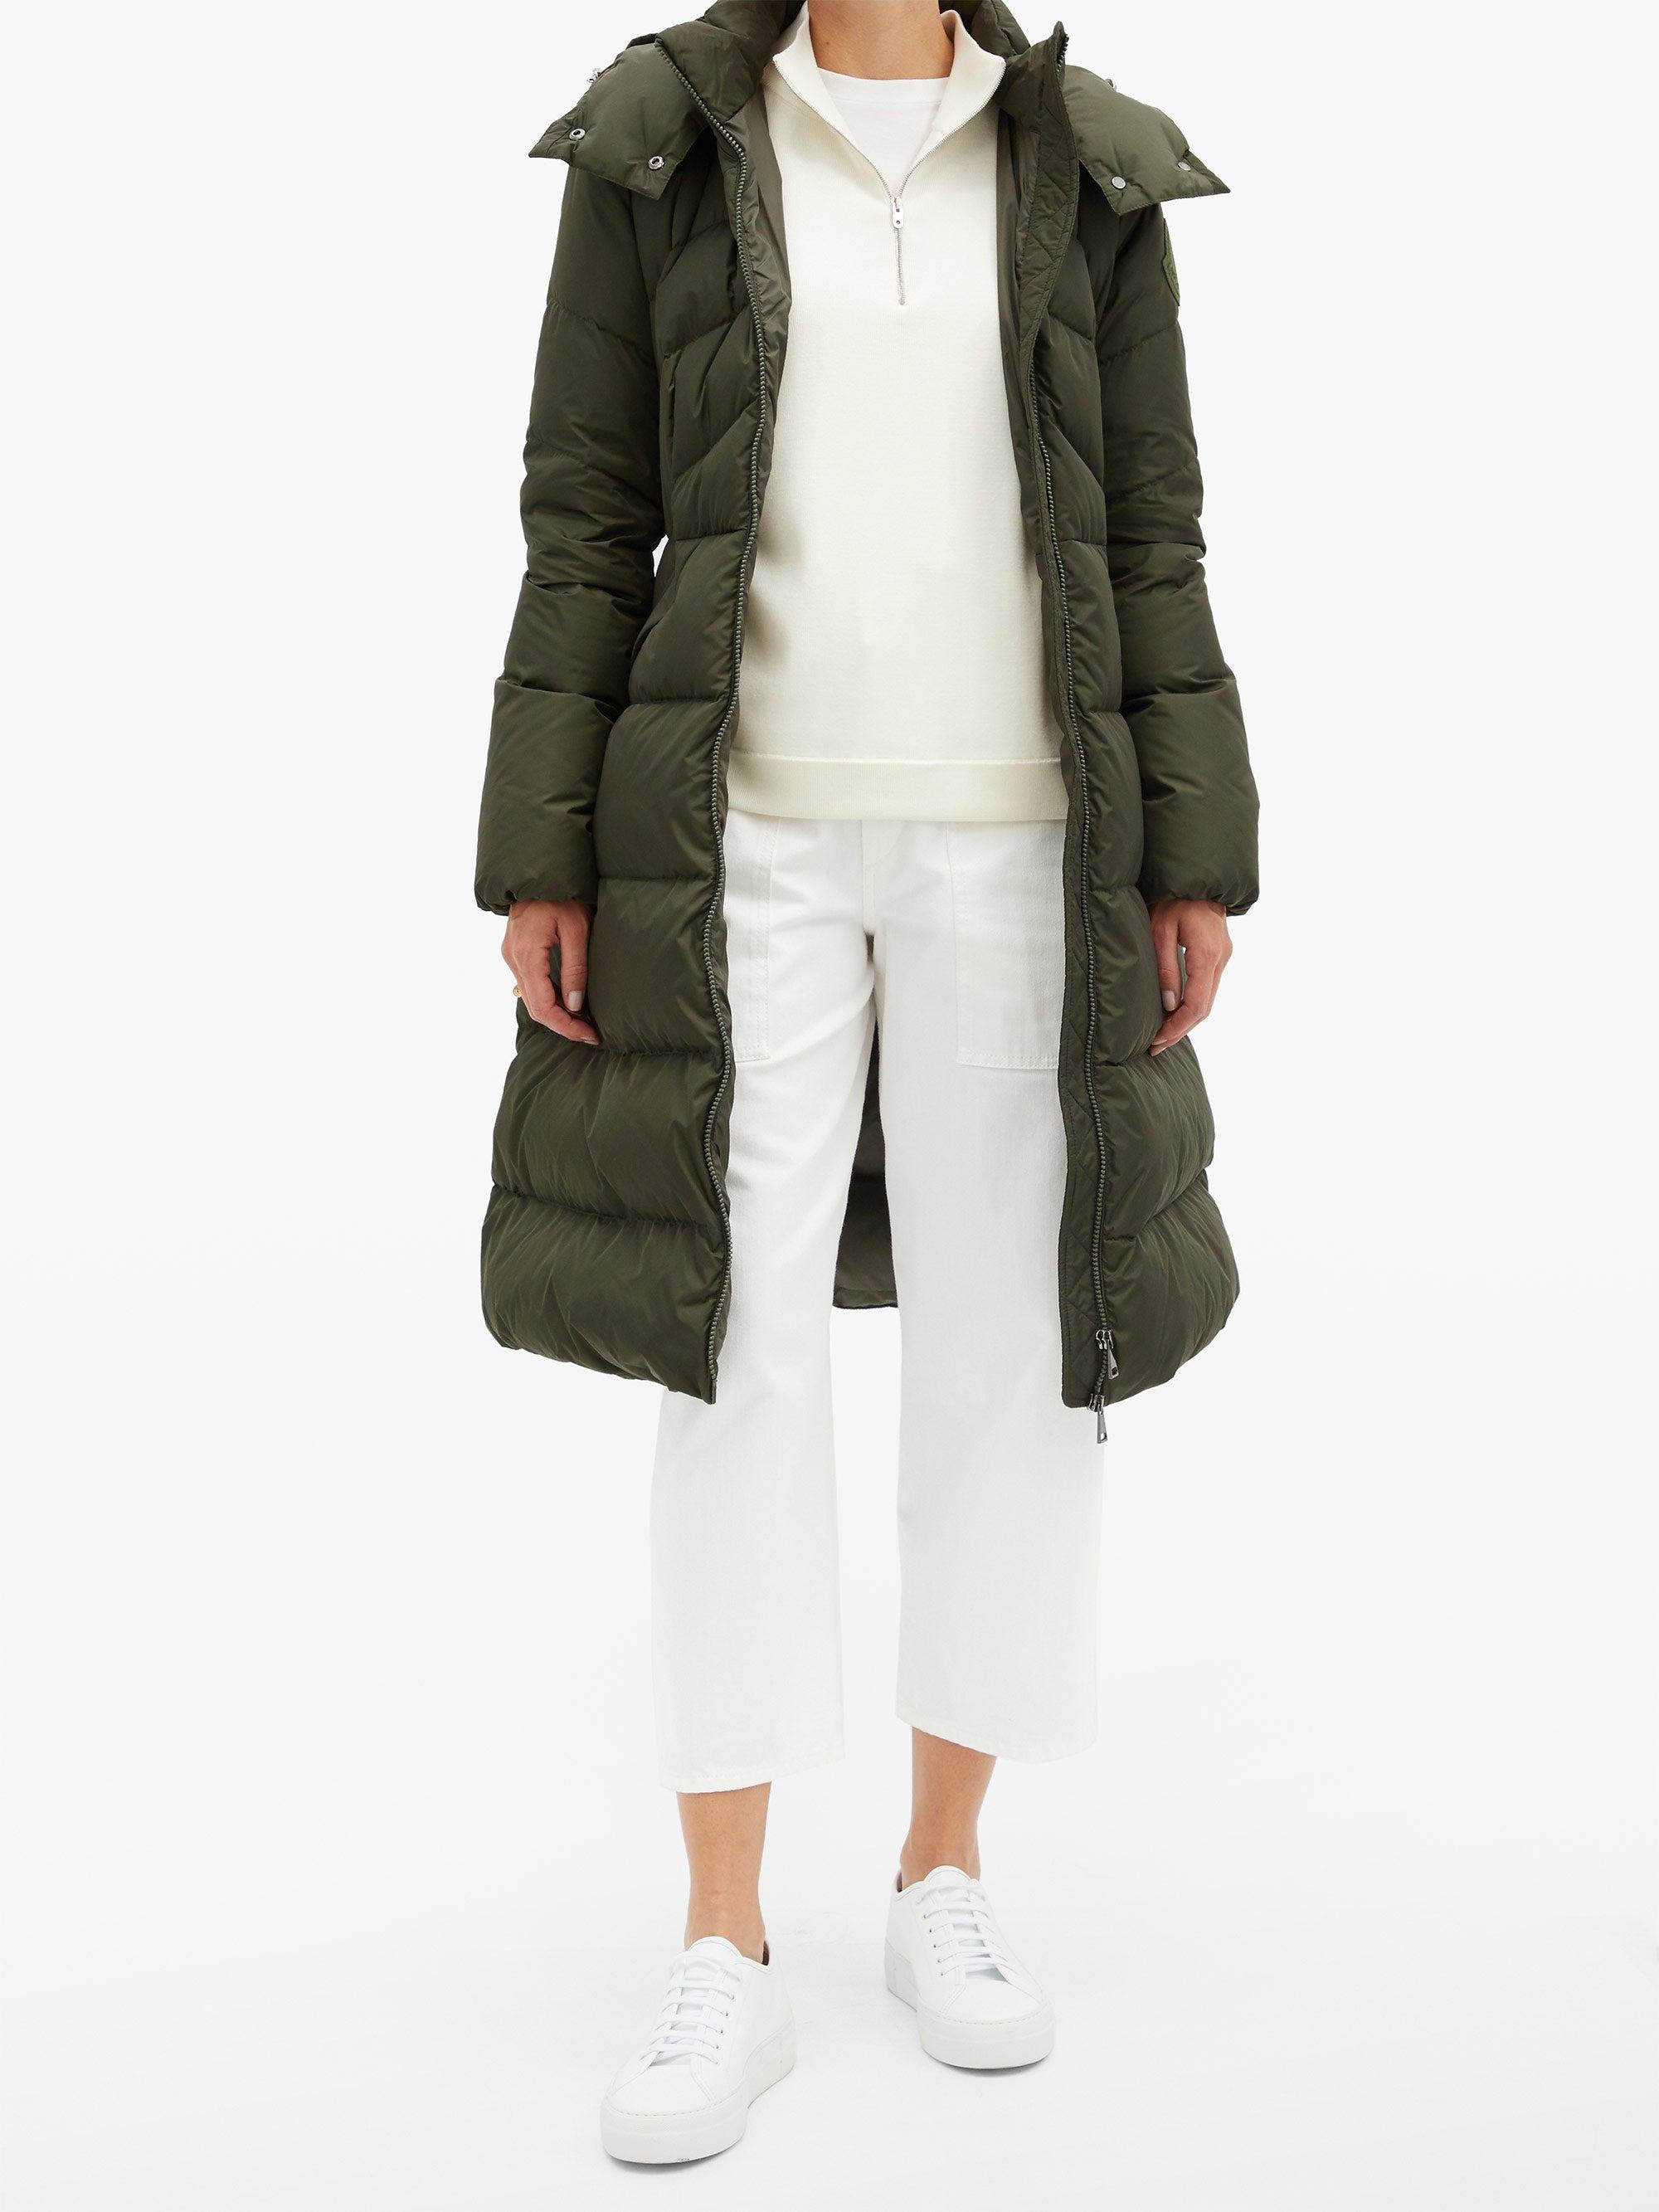 Moncler Agot Chevron-quilted Shell Coat in Khaki (Green) - Lyst